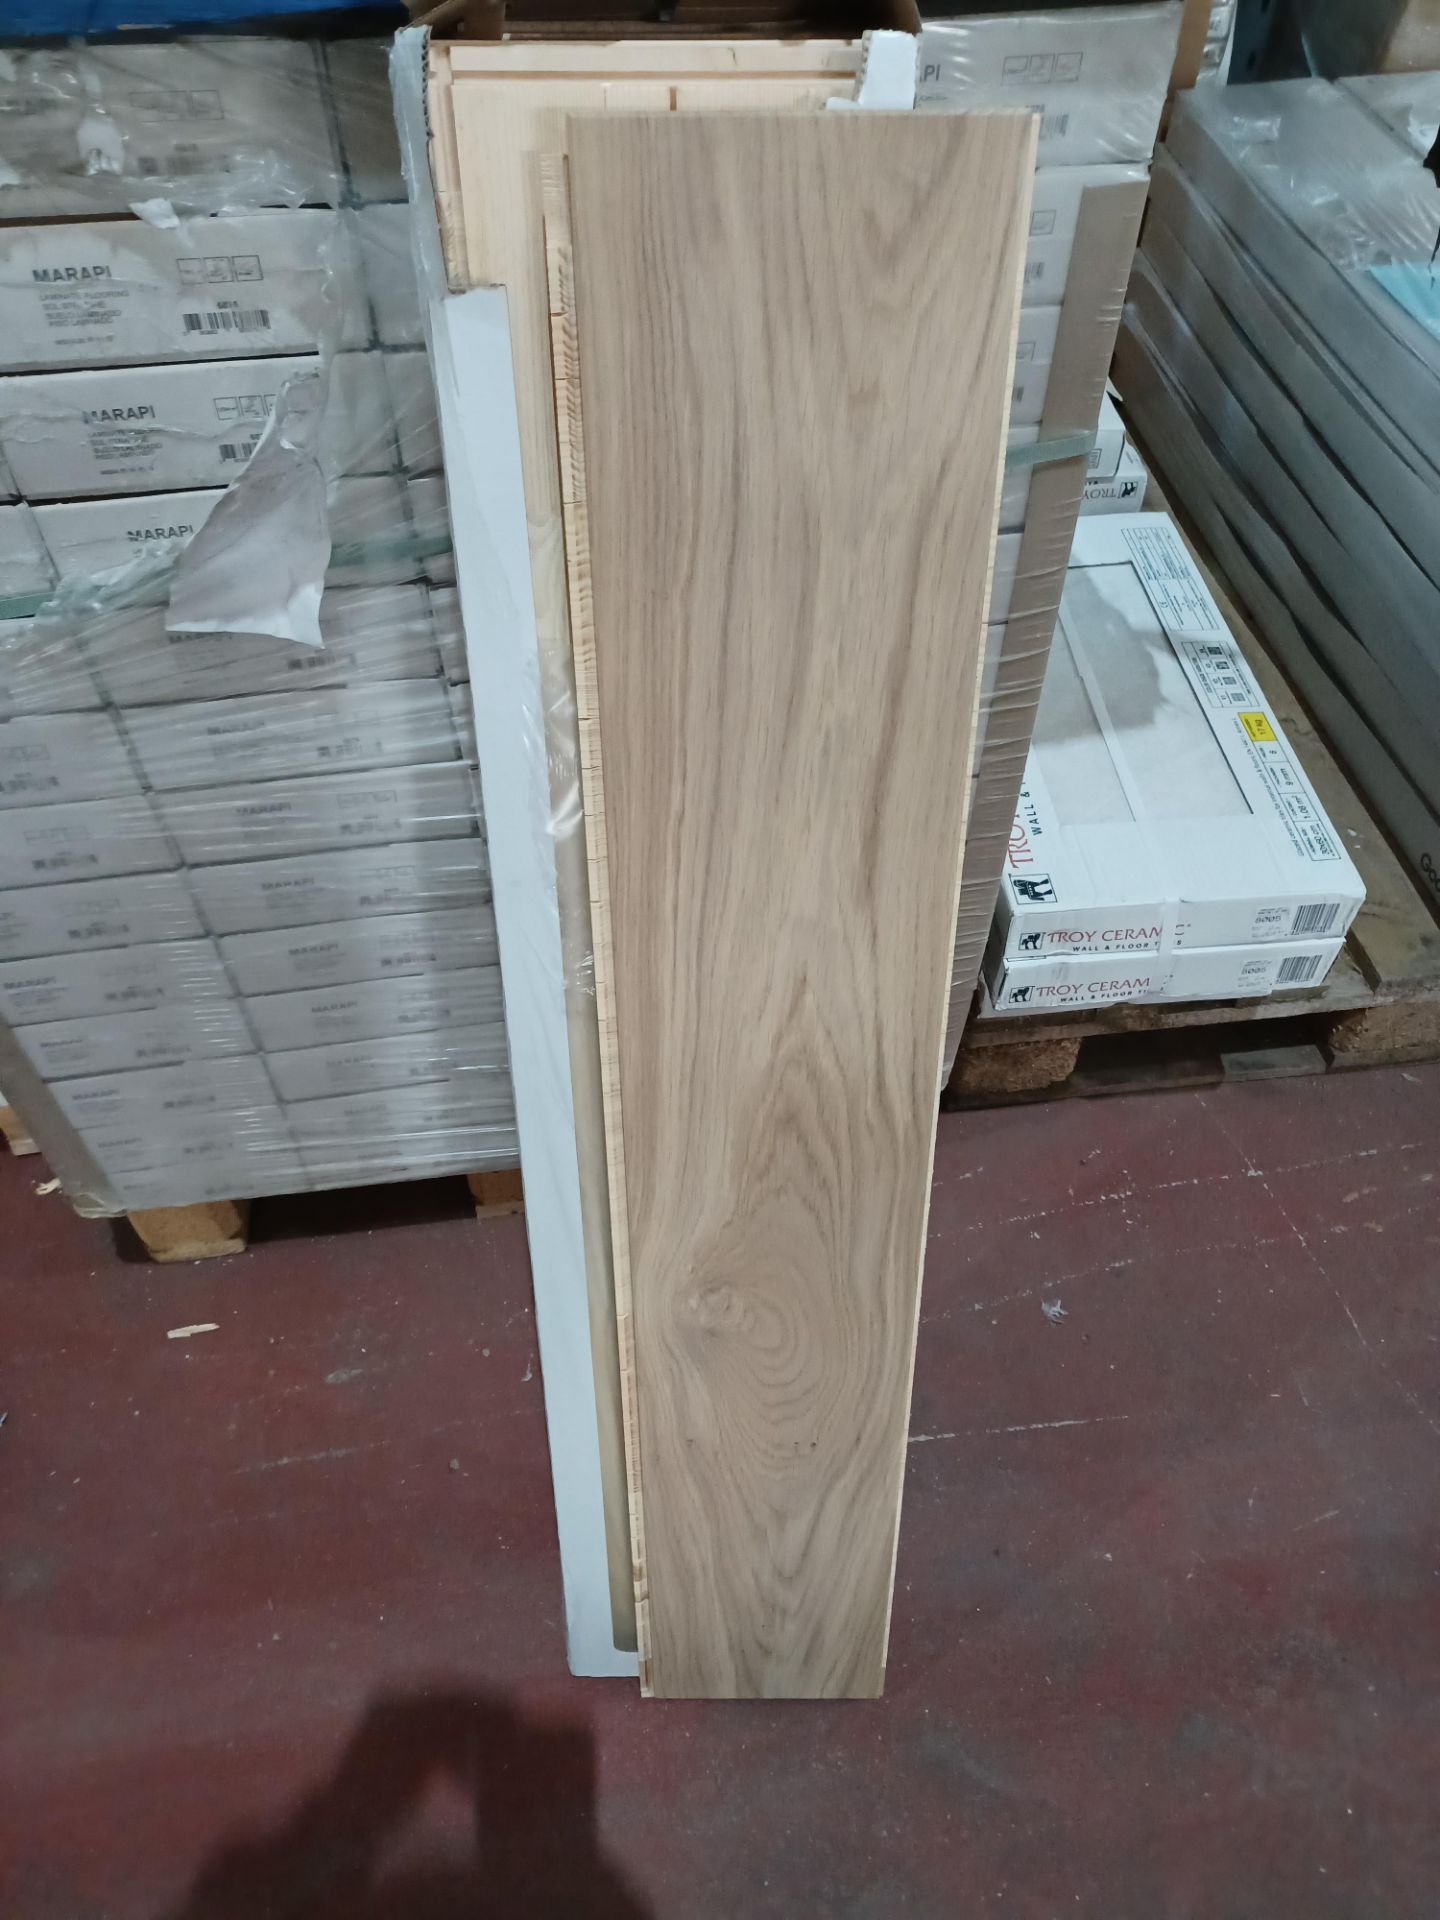 4 x PACKS OF Halland White Oak Real wood top layer flooring. Each pack contains 1.37m2, giving